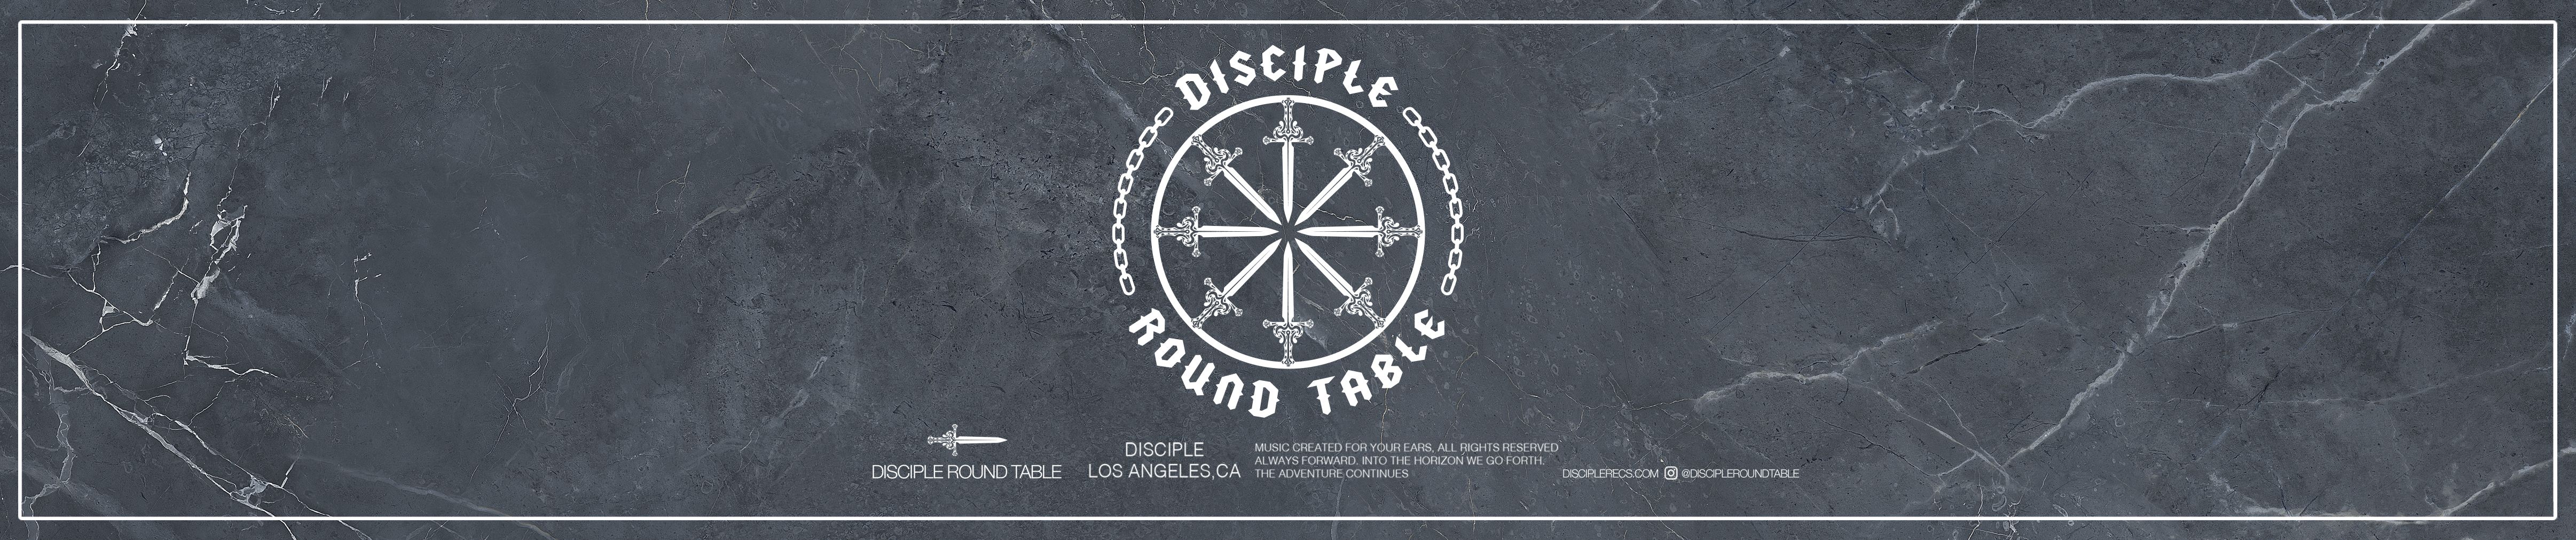 Stream Disciple Round Table, Knights Of The Round Table Secret Society